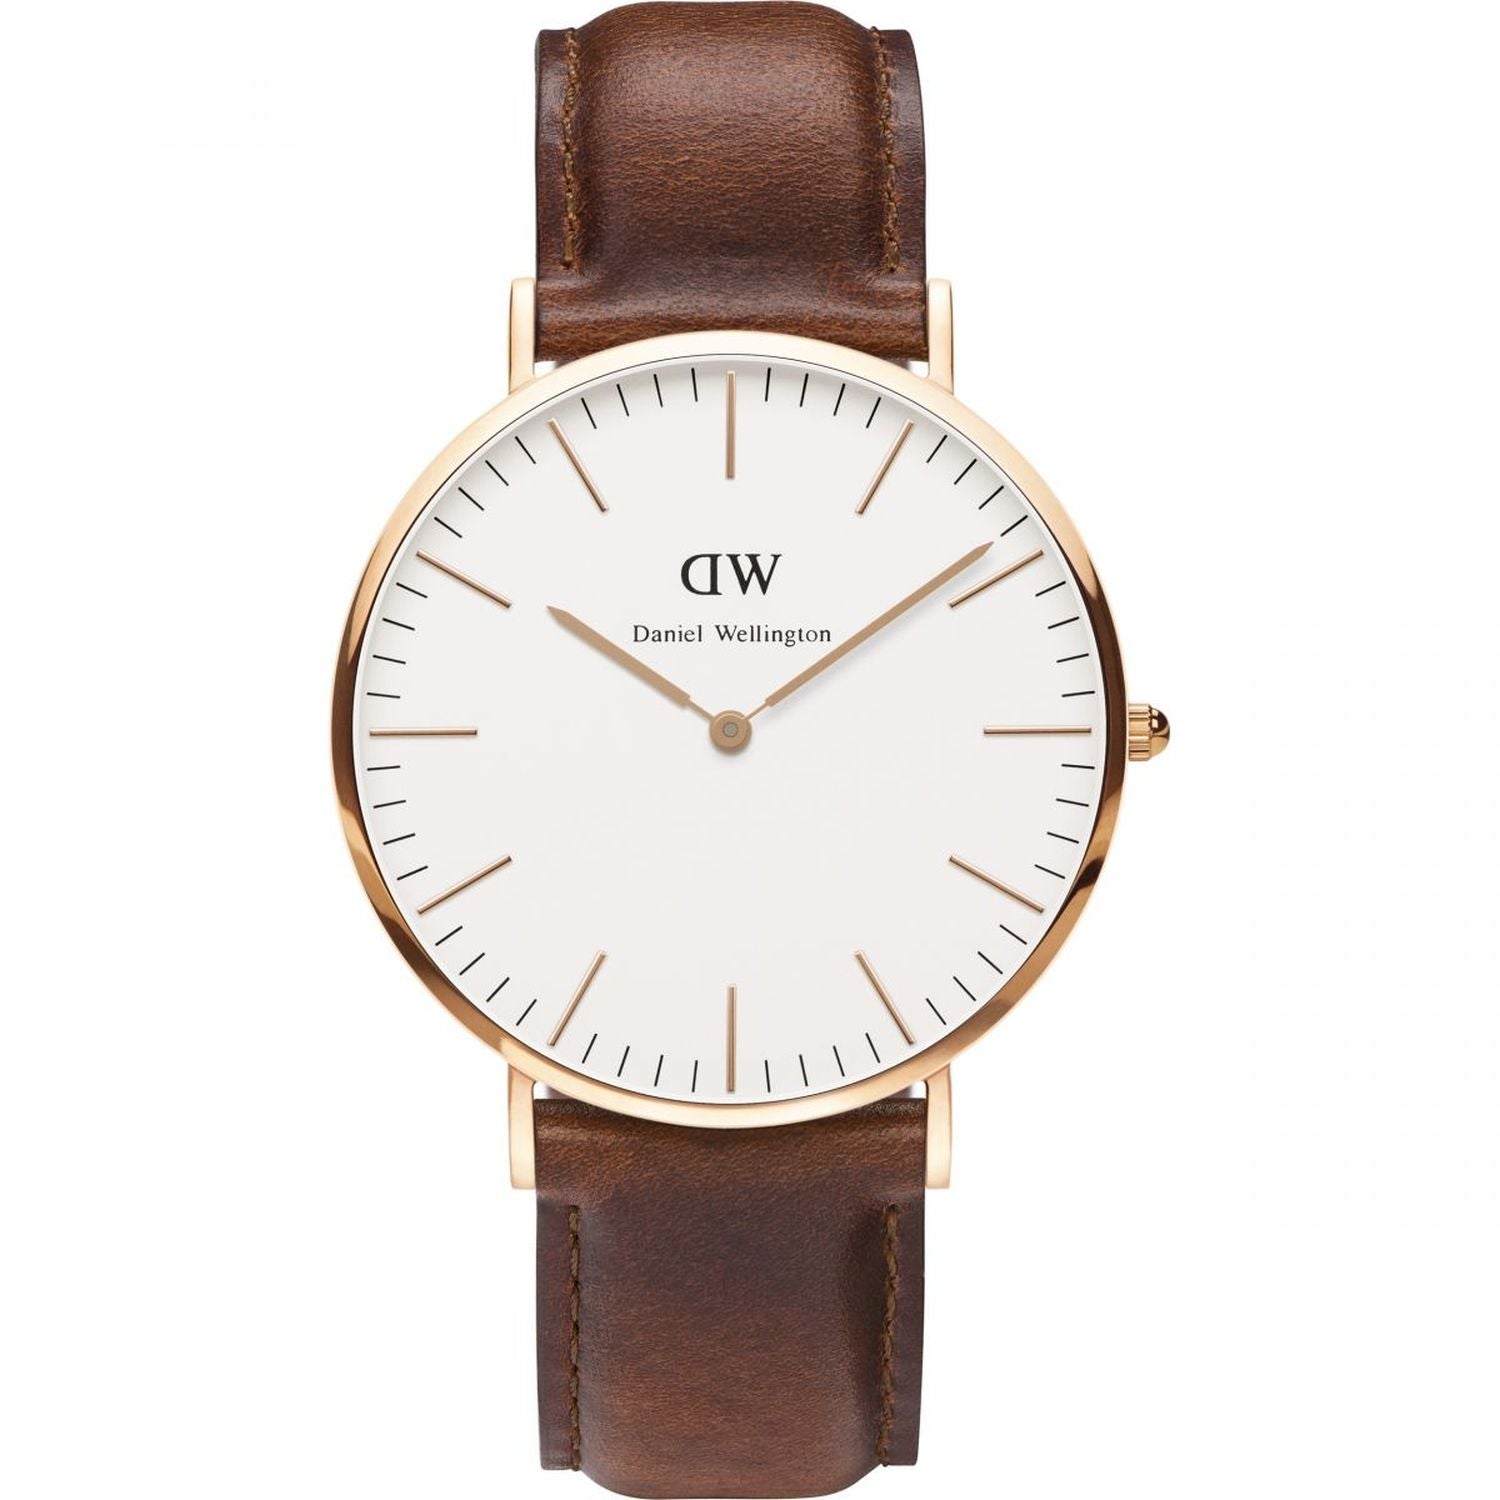 DW Classic St Mawes 40mm - London Time Watches 